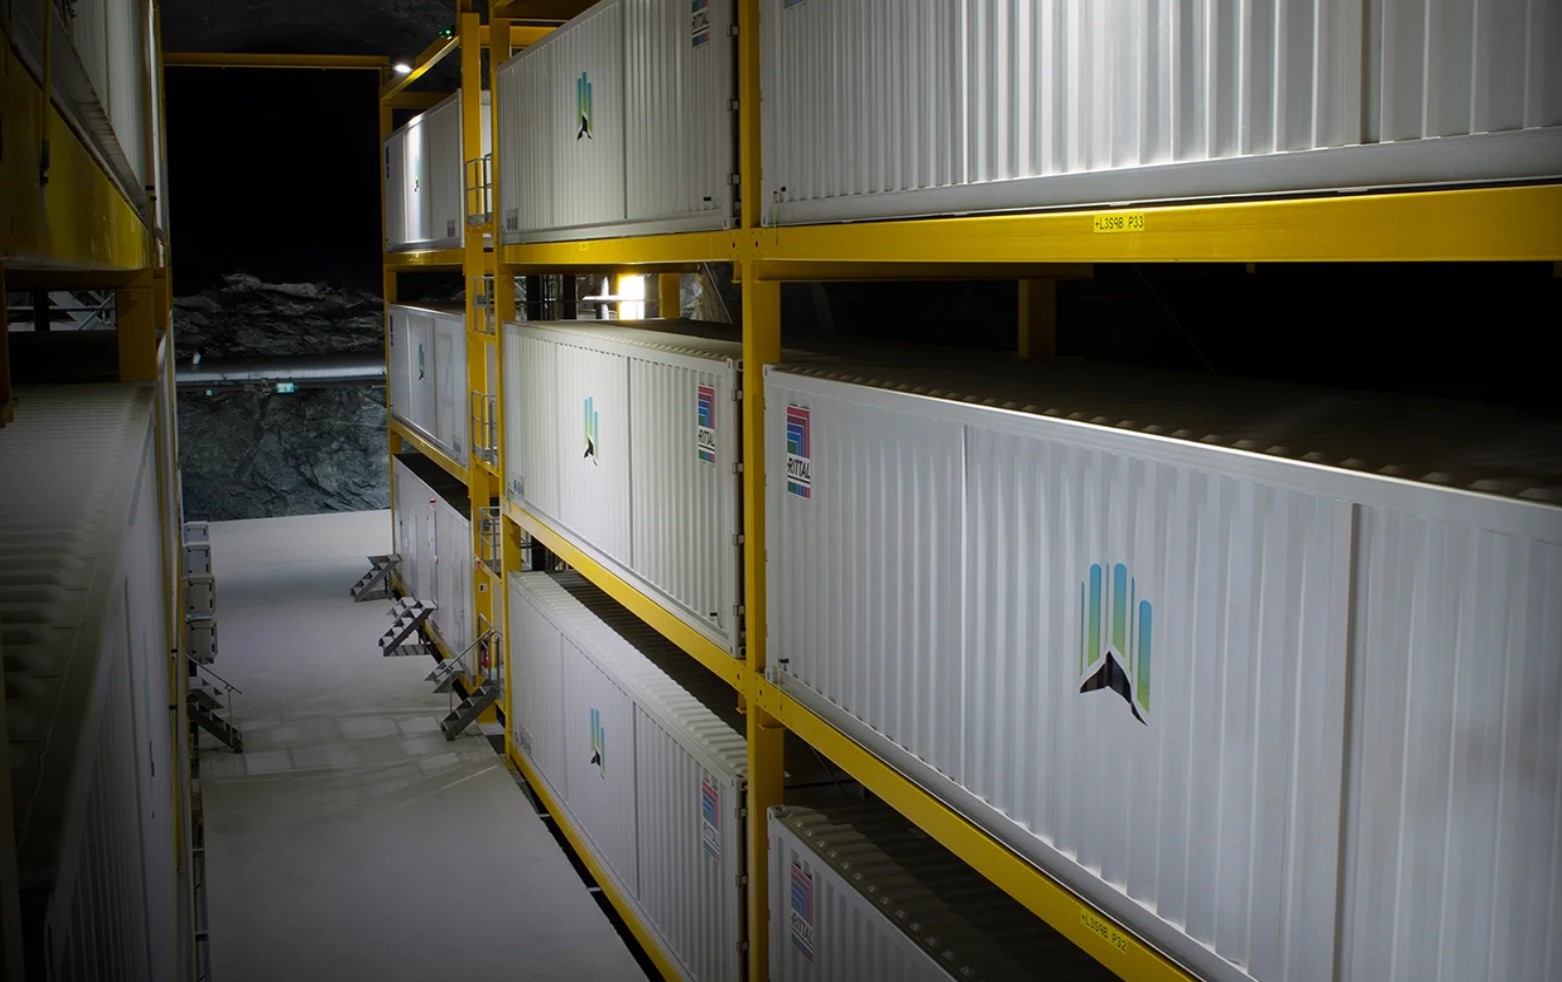 Northern Data’s mining containers in Lefdal Mine, Måløy. Source: Northern Data